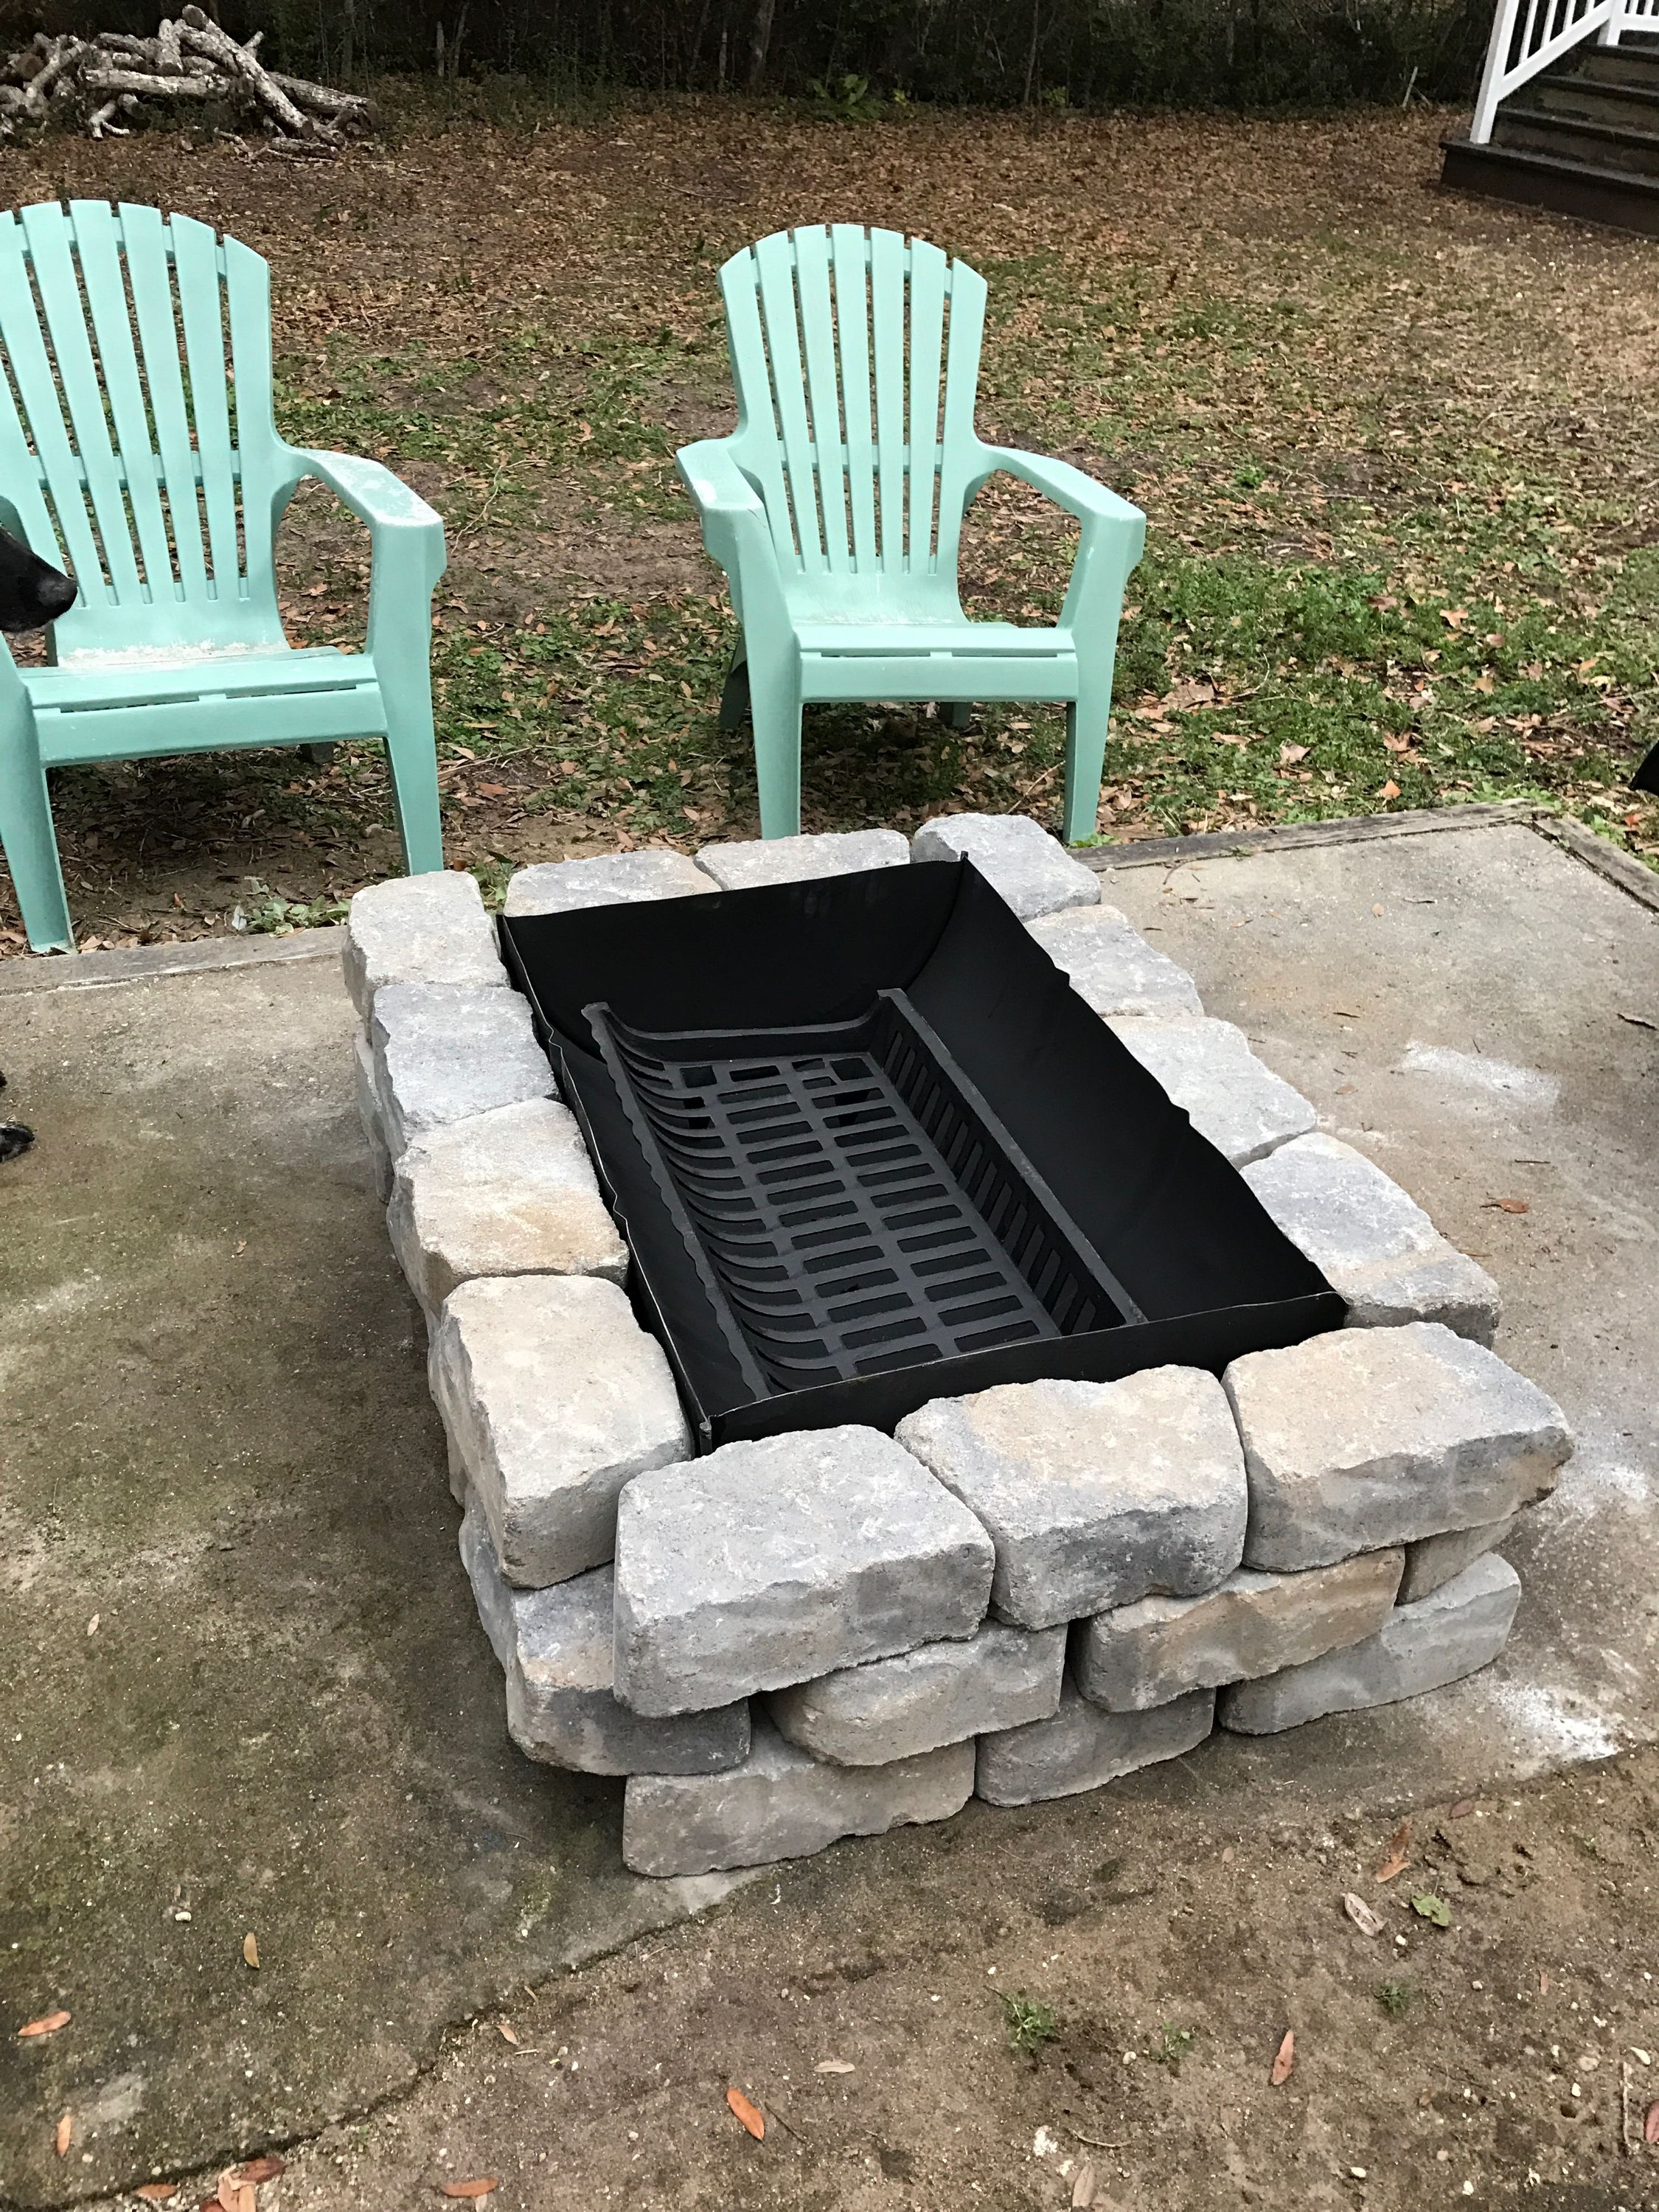 Inexpensive Fire Pit Made From A 55 Gallon Drum A Grate From throughout proportions 2250 X 3000